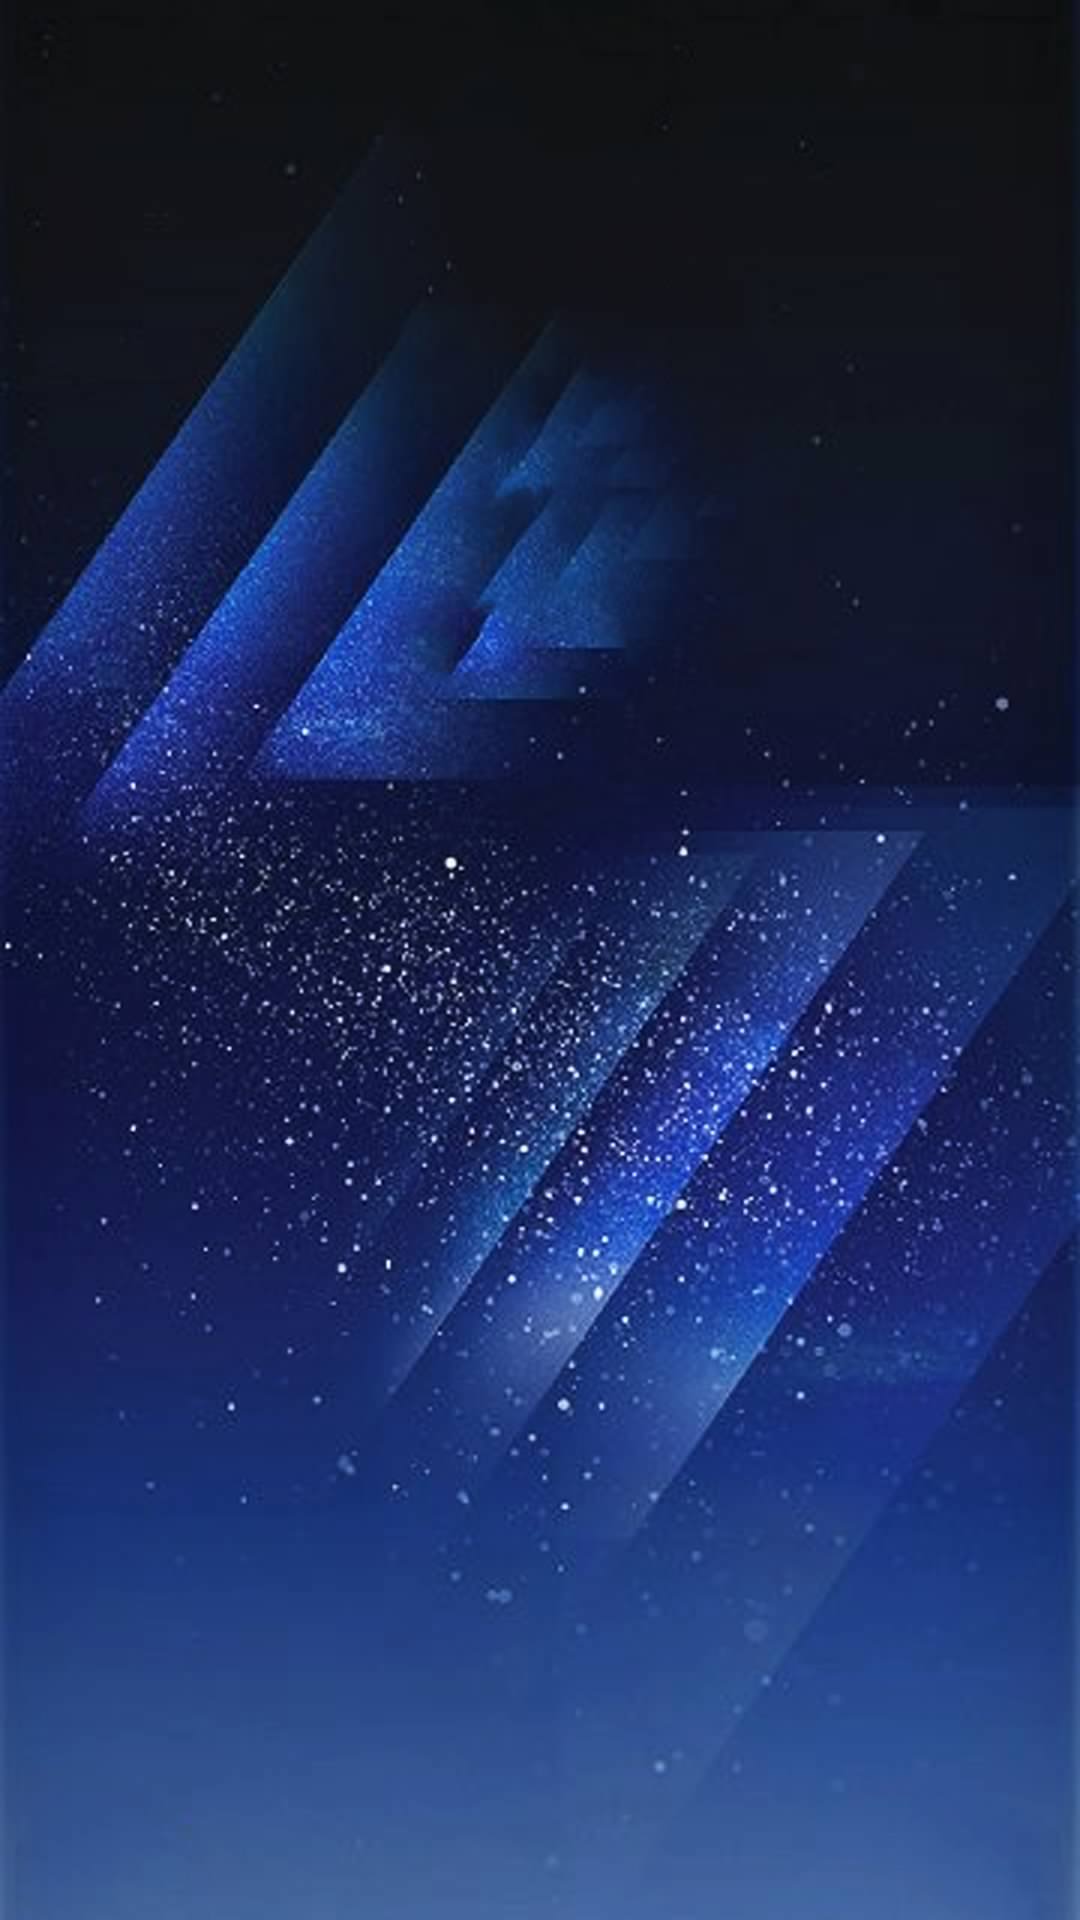 Galaxy S8 Plus Lock Screen Theme For Android  ThemeBowl